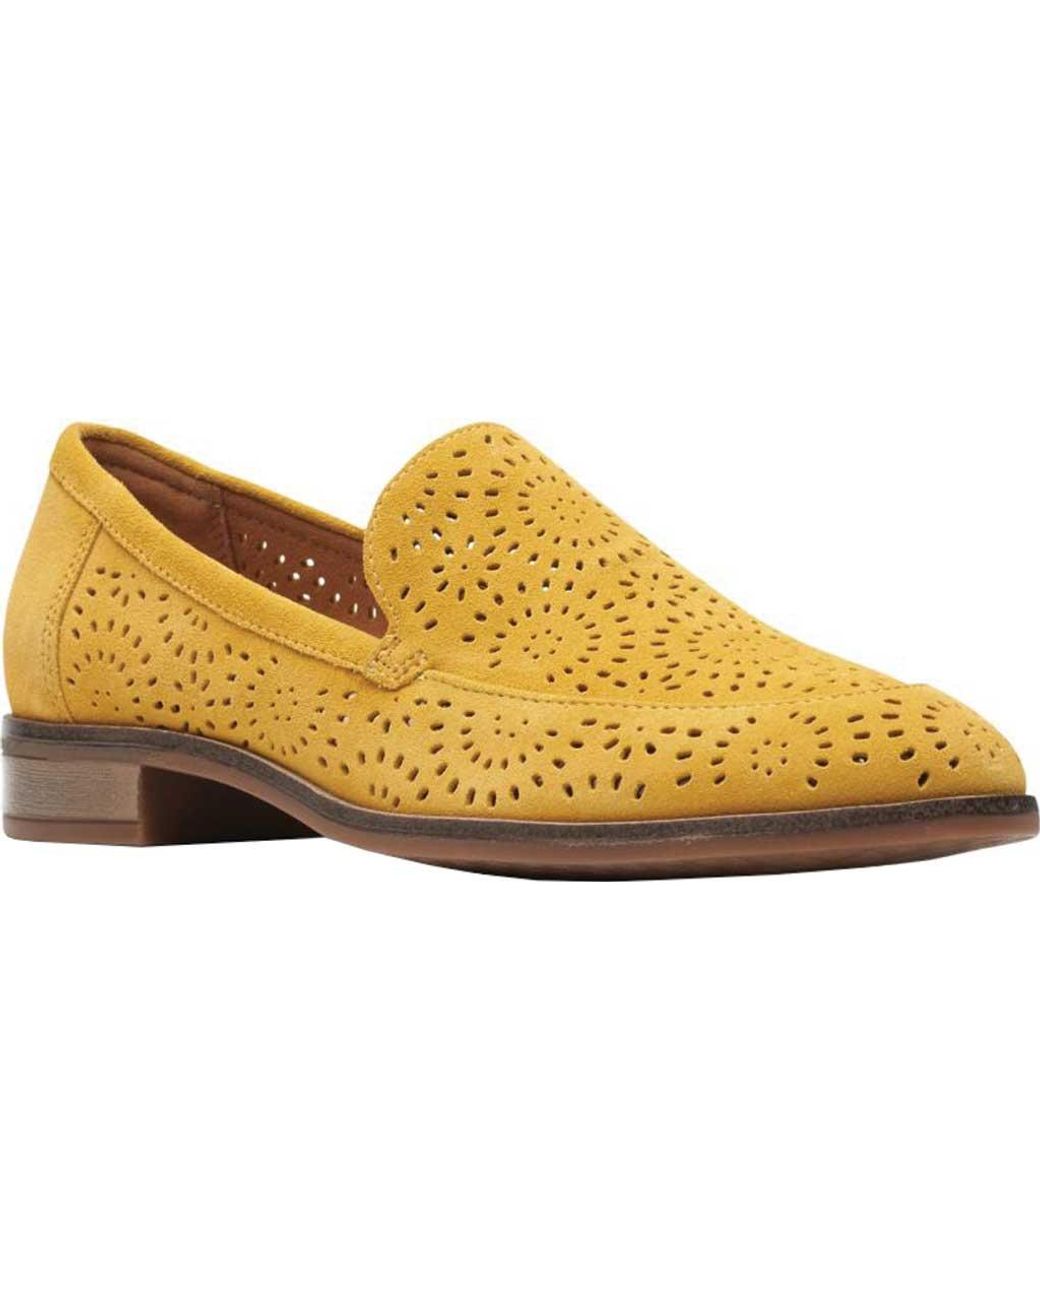 Clarks Suede Trish Calla Loafer in Golden Yellow Suede (Yellow) - Lyst